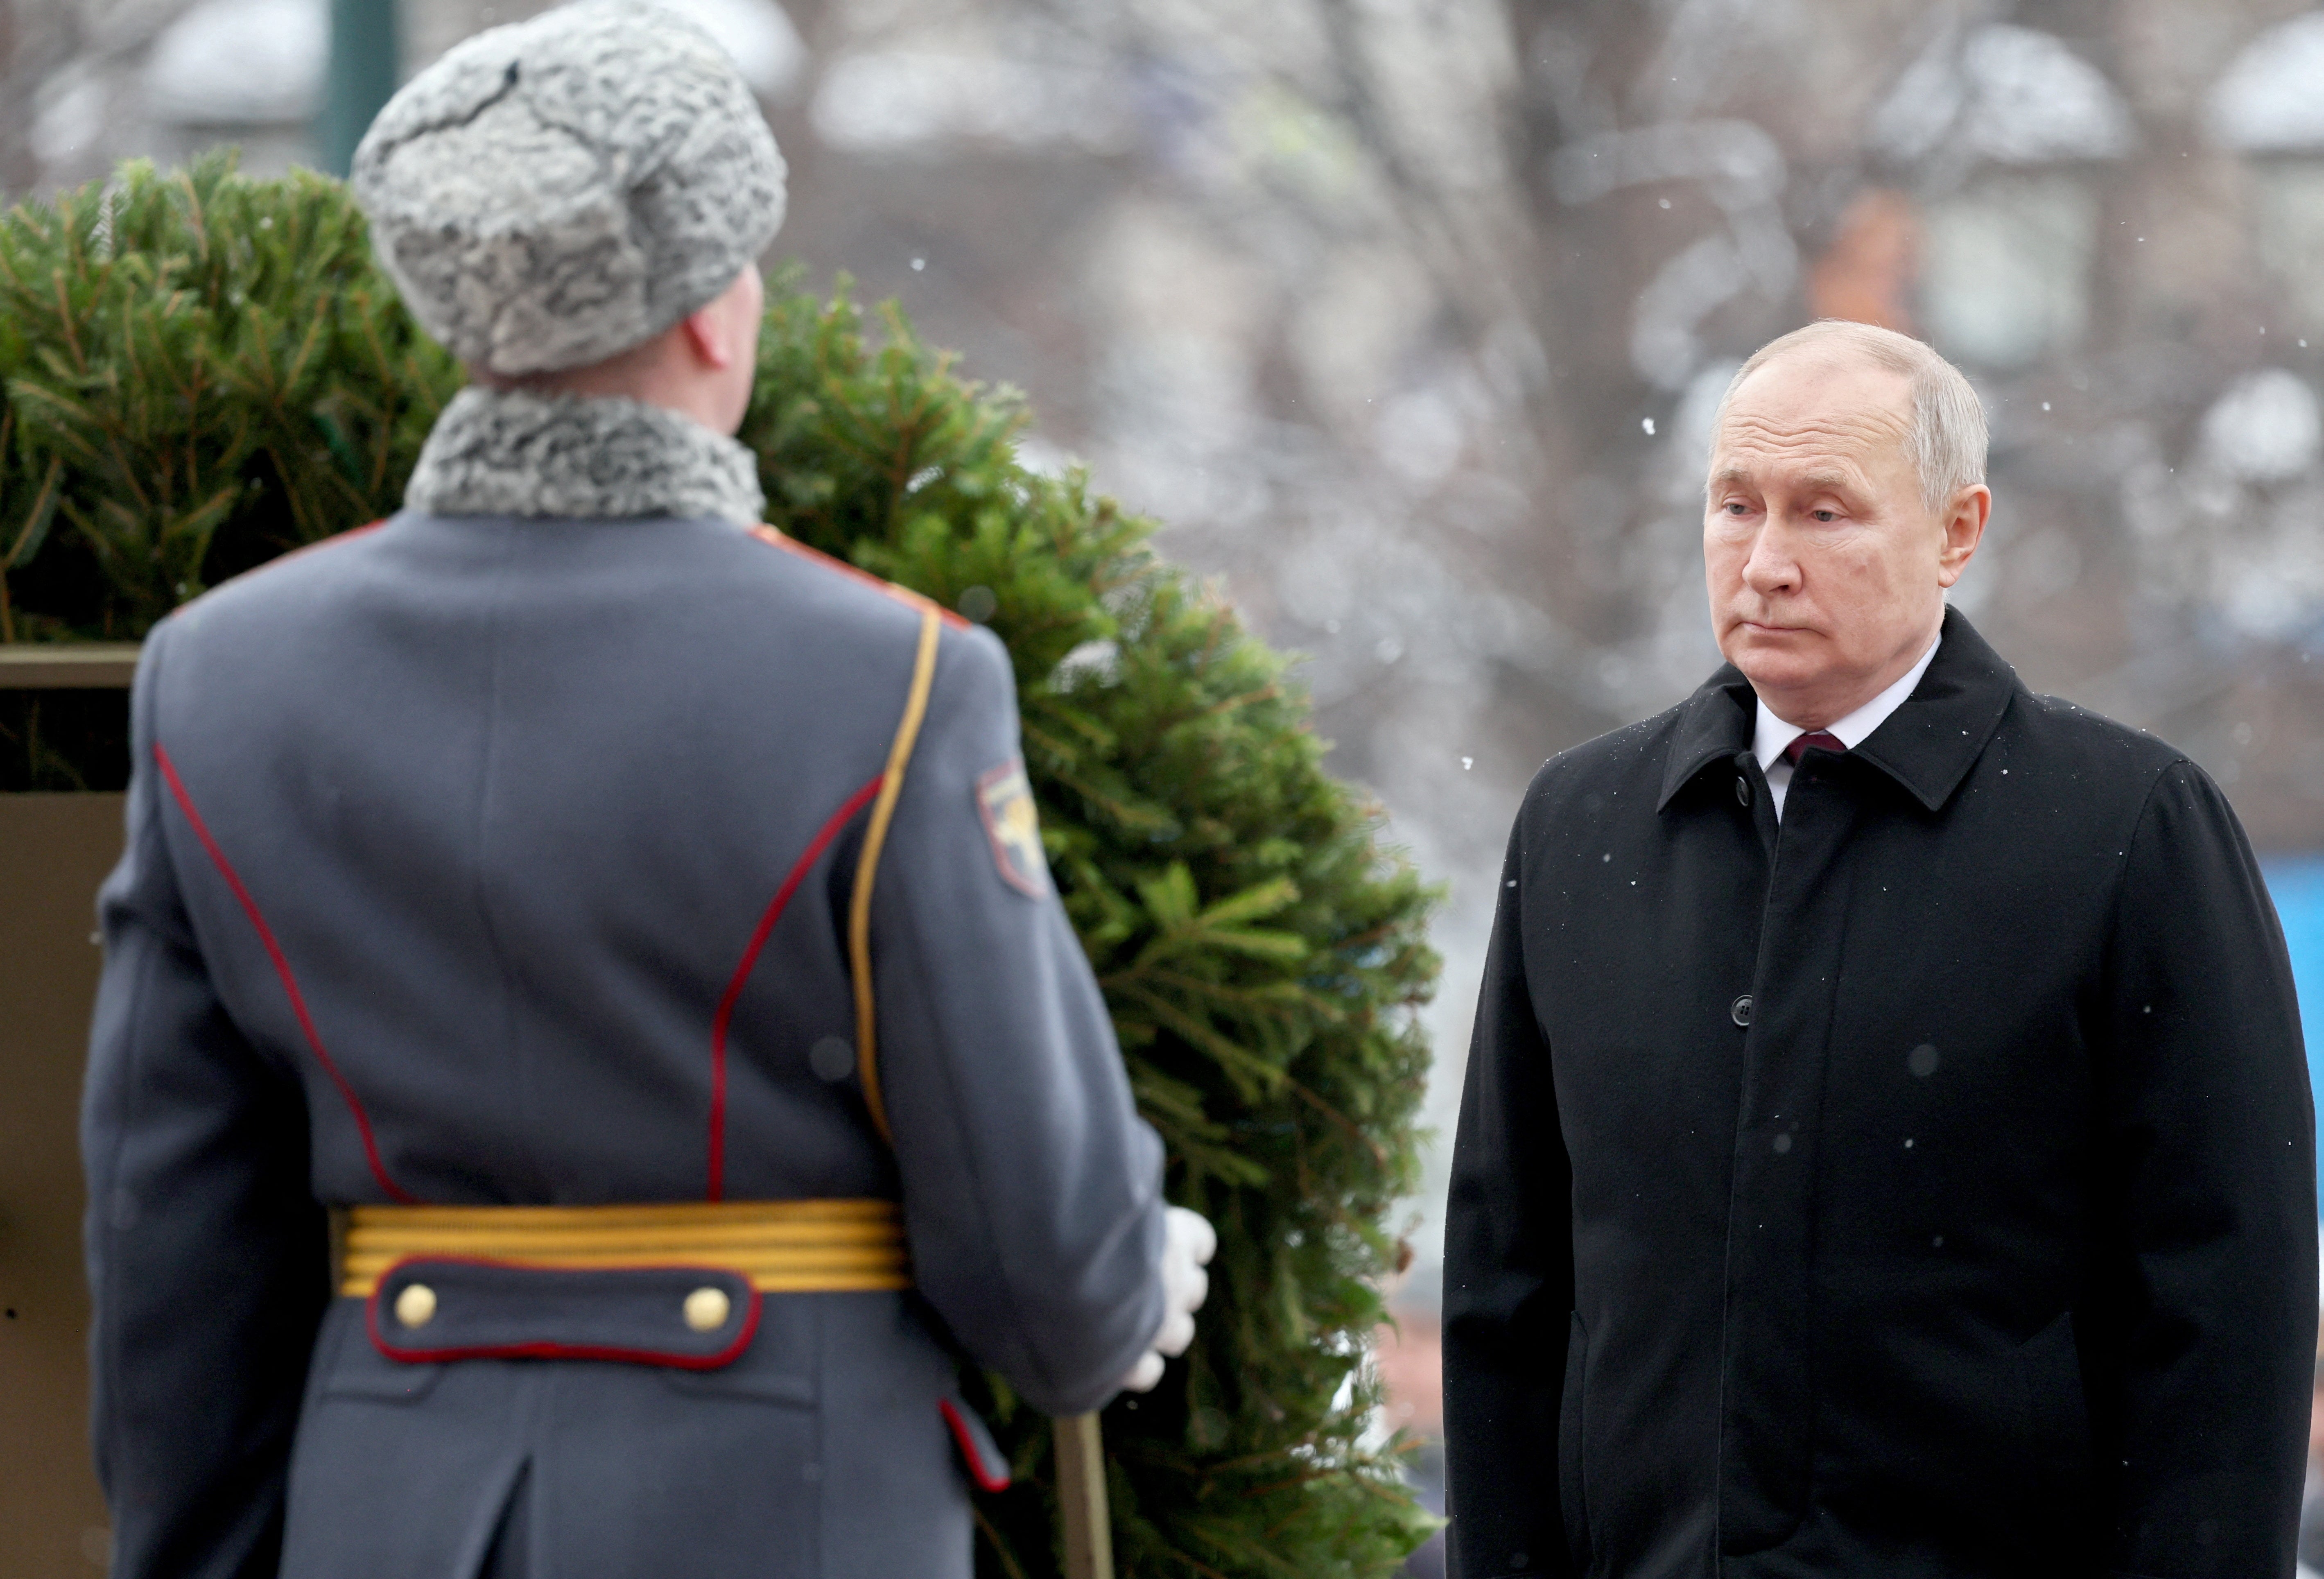 President Vladimir Putin takes part in a wreath laying ceremony marking Defender of the Fatherland Day at the Tomb of the Unknown Soldier by the Kremlin Wall in Moscow